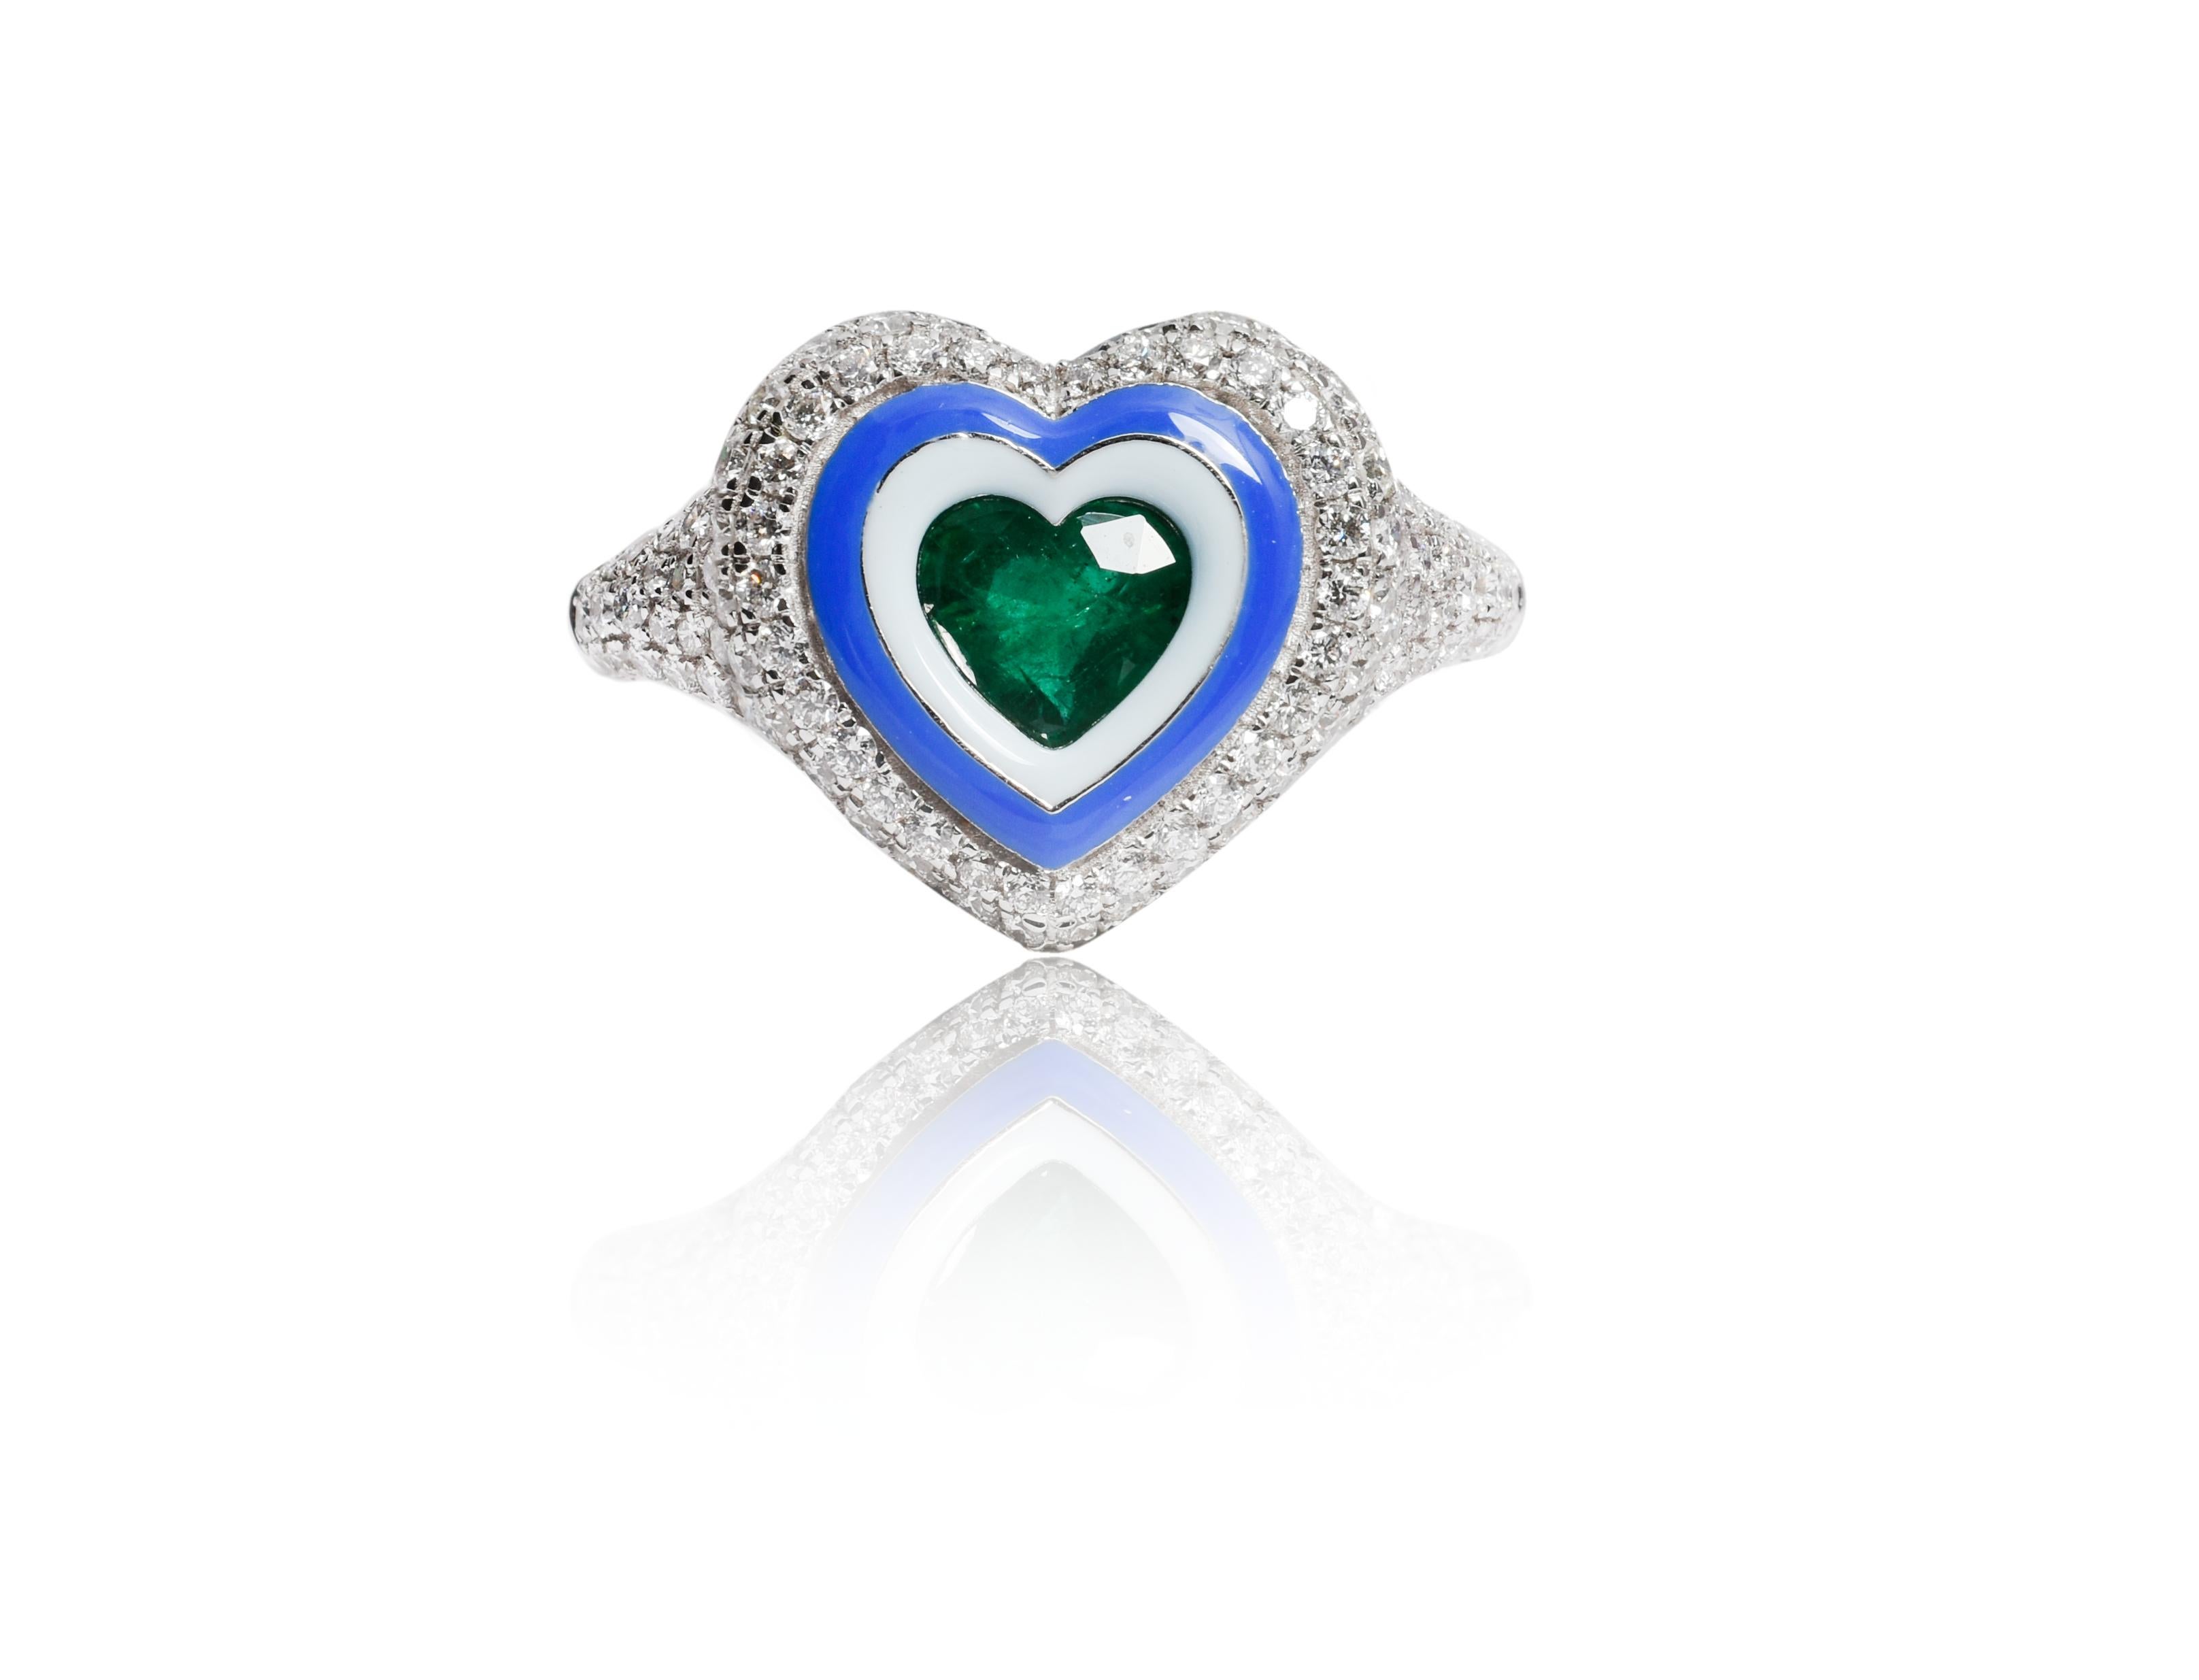 For Sale:  Kamyen, Oasis Heart Pinky Ring, Emerald, Fashion Ring 5